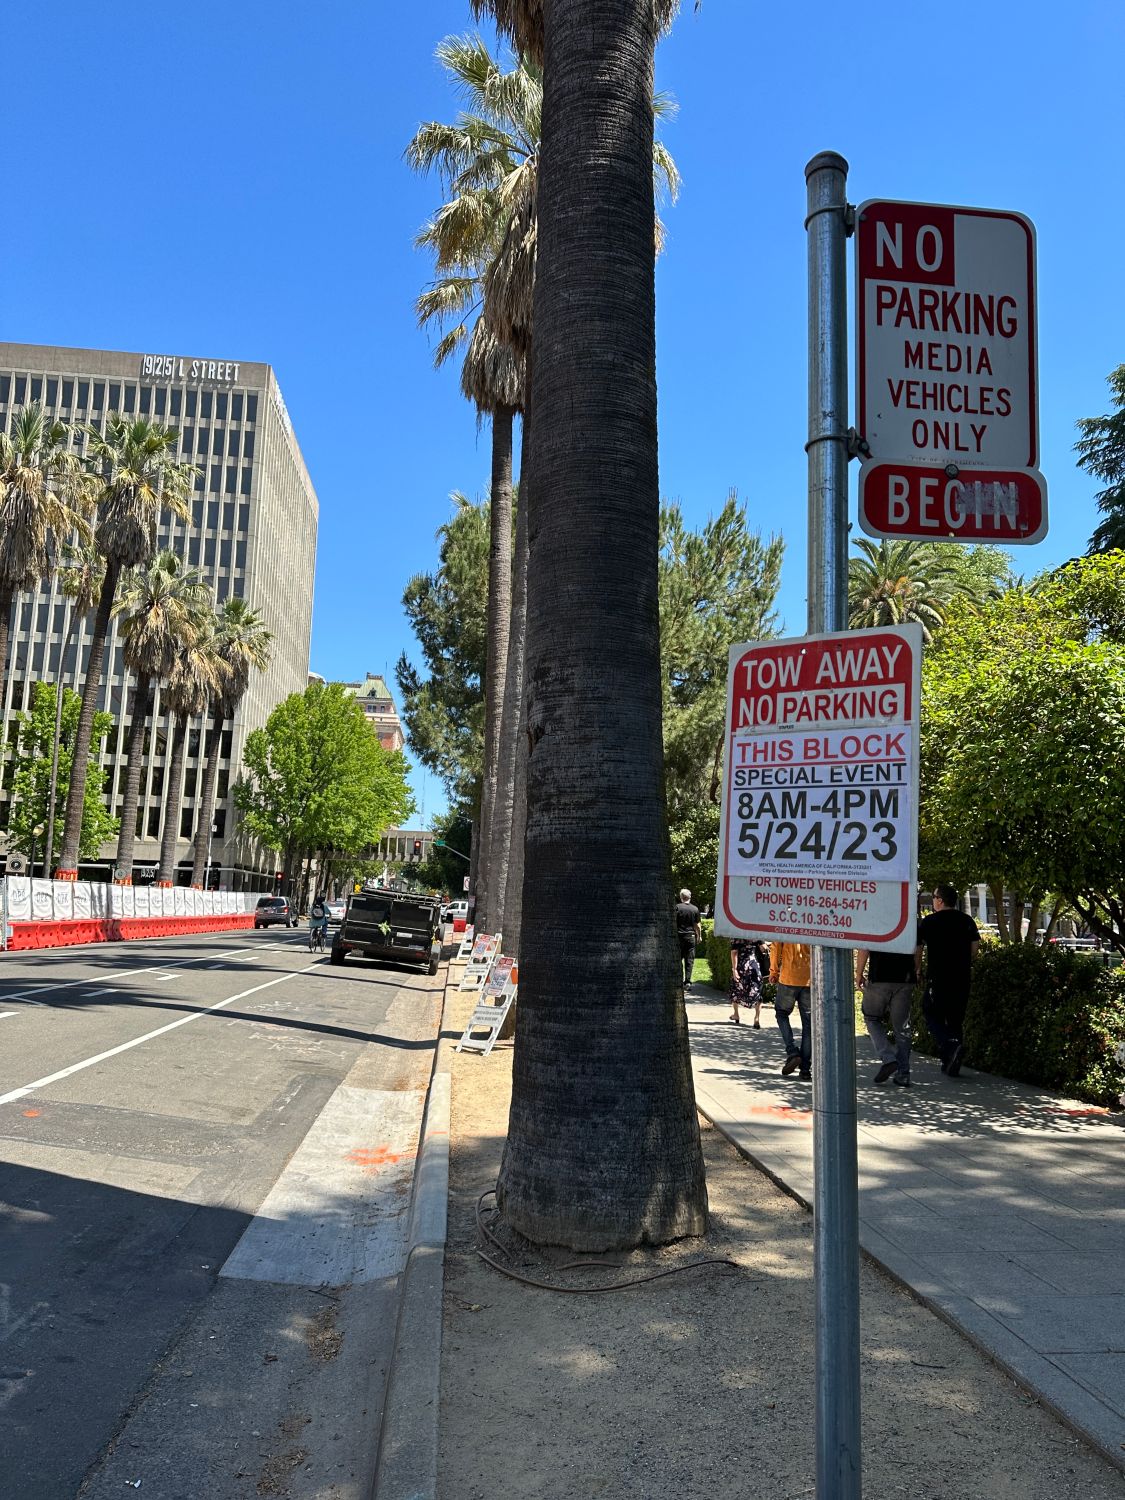 Image of construction sign next to parking meter